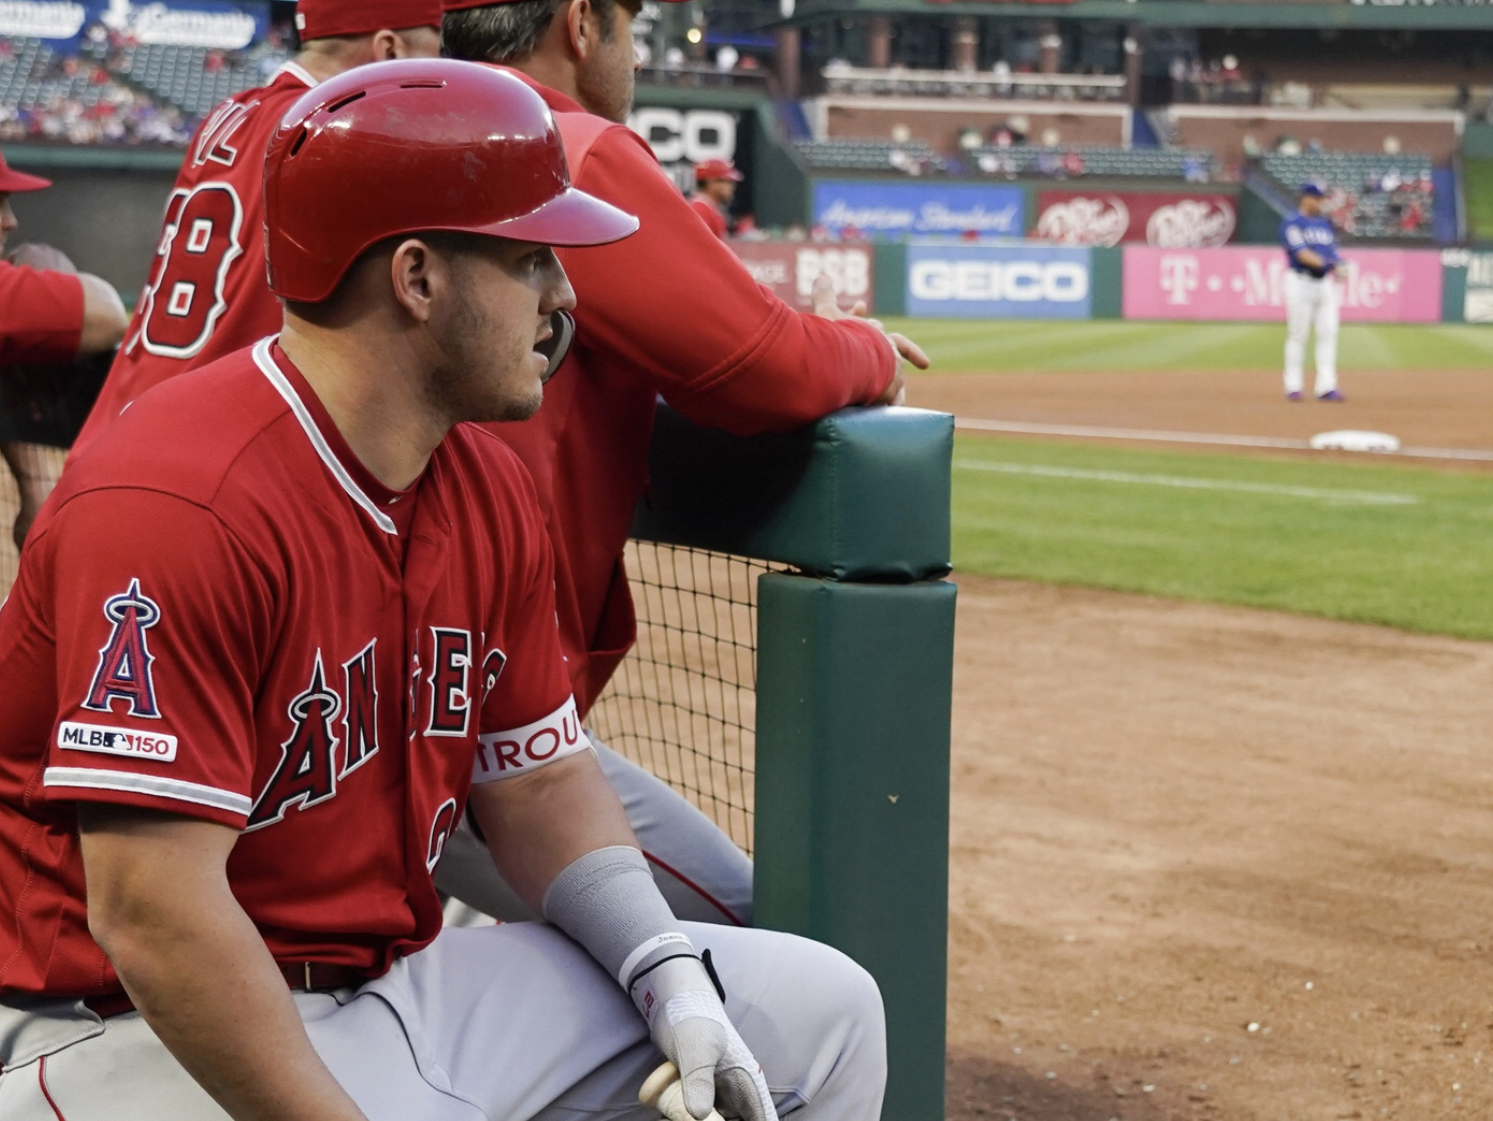 WATCH: Mike Trout flat out robbed of extra bases and RBI on brilliant play1493 x 1121